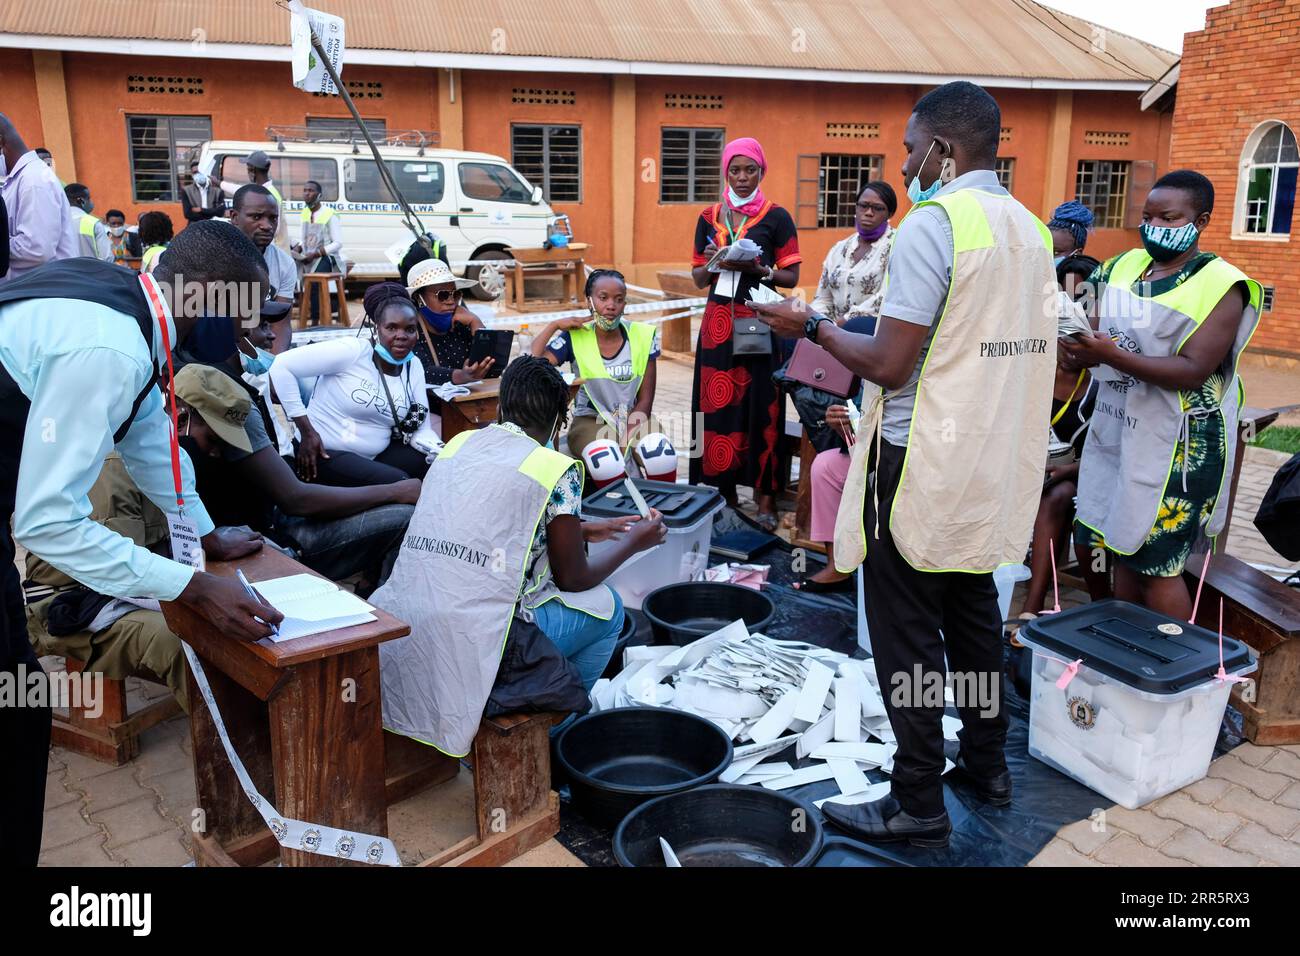 210114 -- NAJJERA UGANDA, Jan. 14, 2021 -- Staff members count ballots at a polling station in Najjera, Wakiso District, Uganda, on Jan. 14, 2021. Vote counting in Uganda s Thursday presidential and parliamentary elections has started with the country s electoral body saying results are expected to be released in 48 hours. Photo by /Xinhua UGANDA-NAJJERA-GENERAL ELECTIONS-VOTE COUNTING HajarahxNalwadda PUBLICATIONxNOTxINxCHN Stock Photo